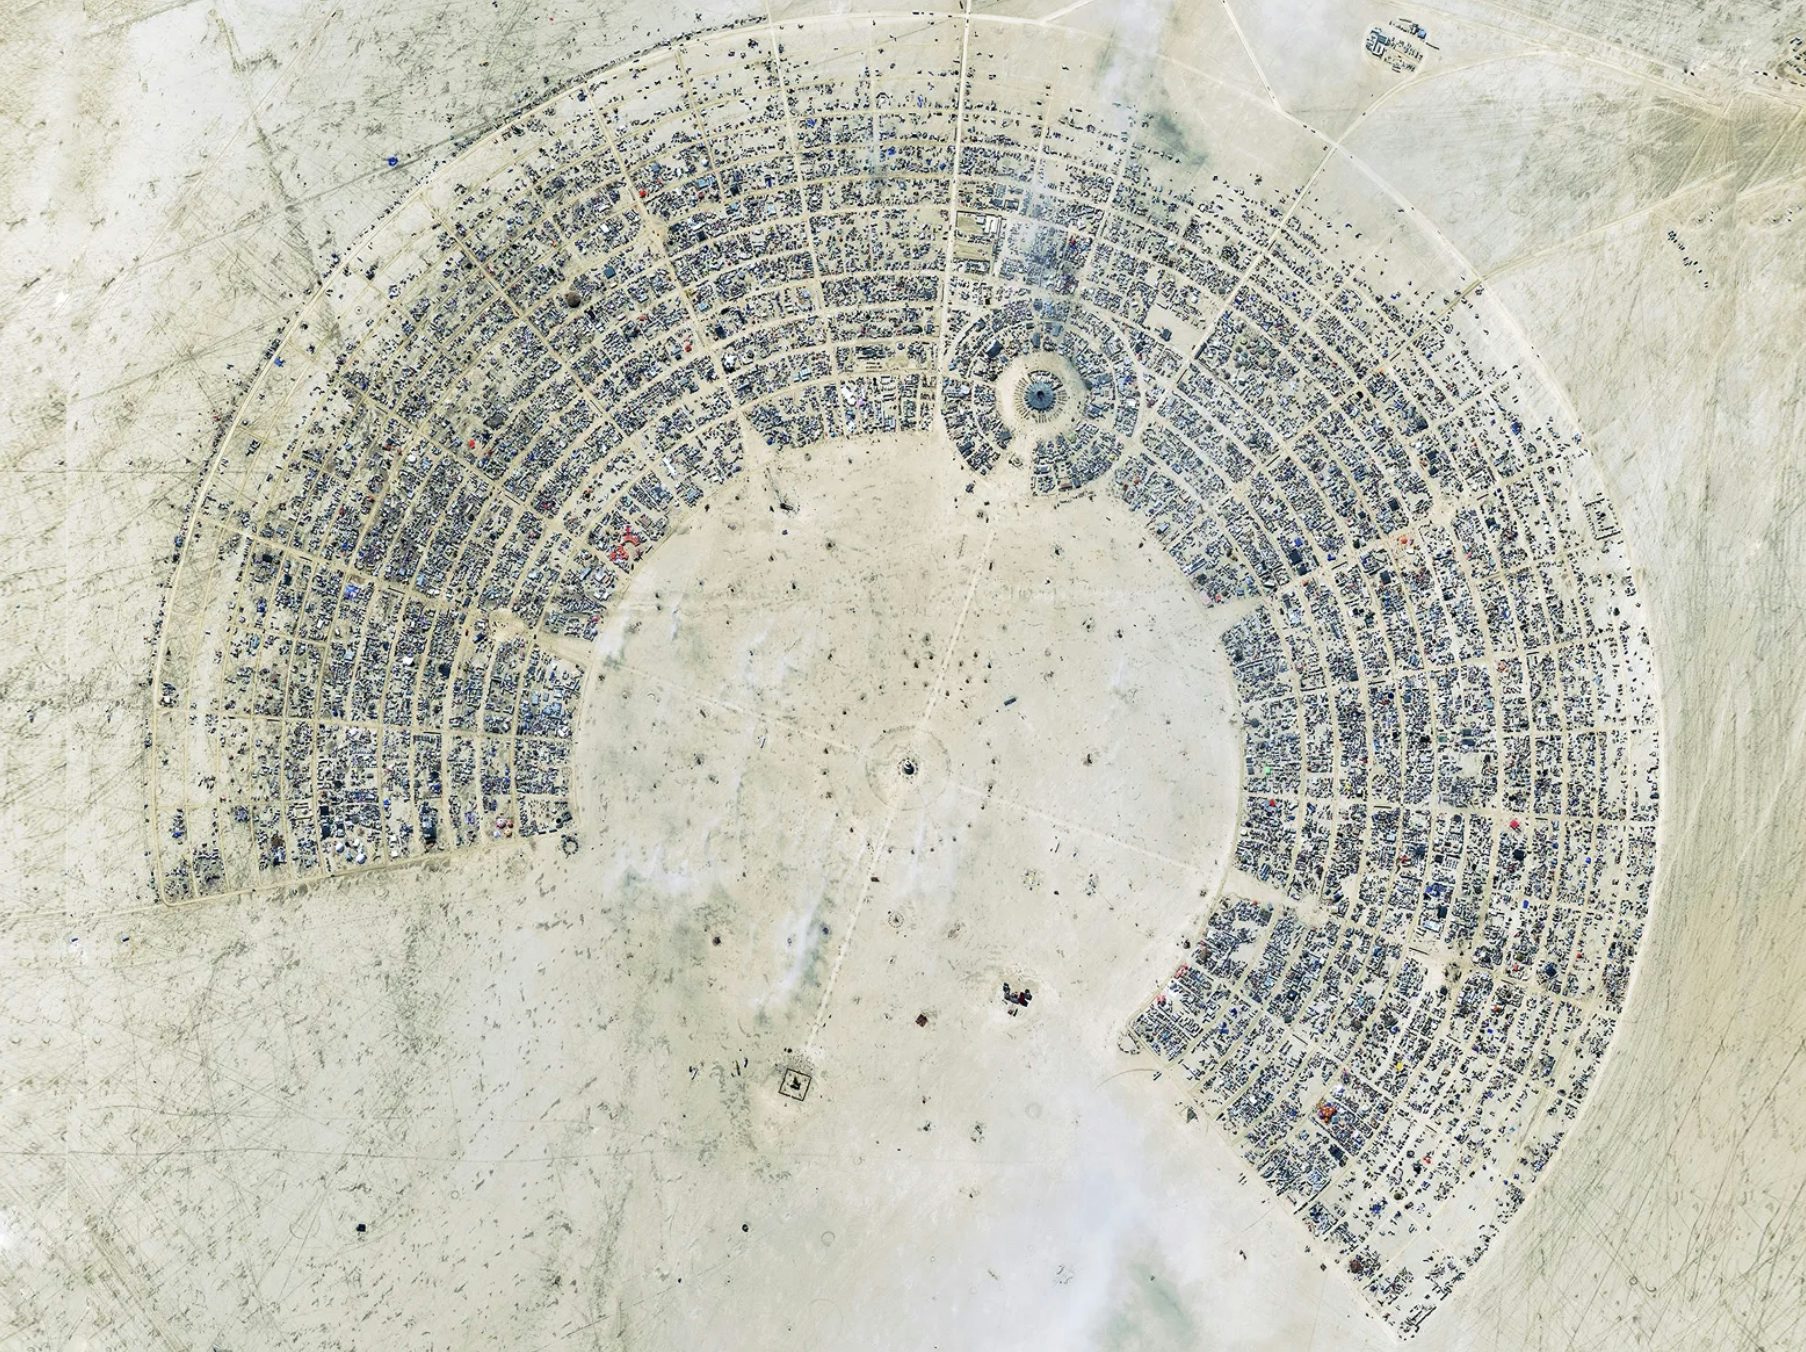 Black Rock City: A temporary settlement in the Nevada desert erected and taken apart every year, where people come together to freely associate in observance of ten principles: radical inclusion, gifting, de-commodification, radical self-reliance, radical self-expression, communal effort, civic responsibility, leaving no trace, participation, and immediacy. Image: Wired